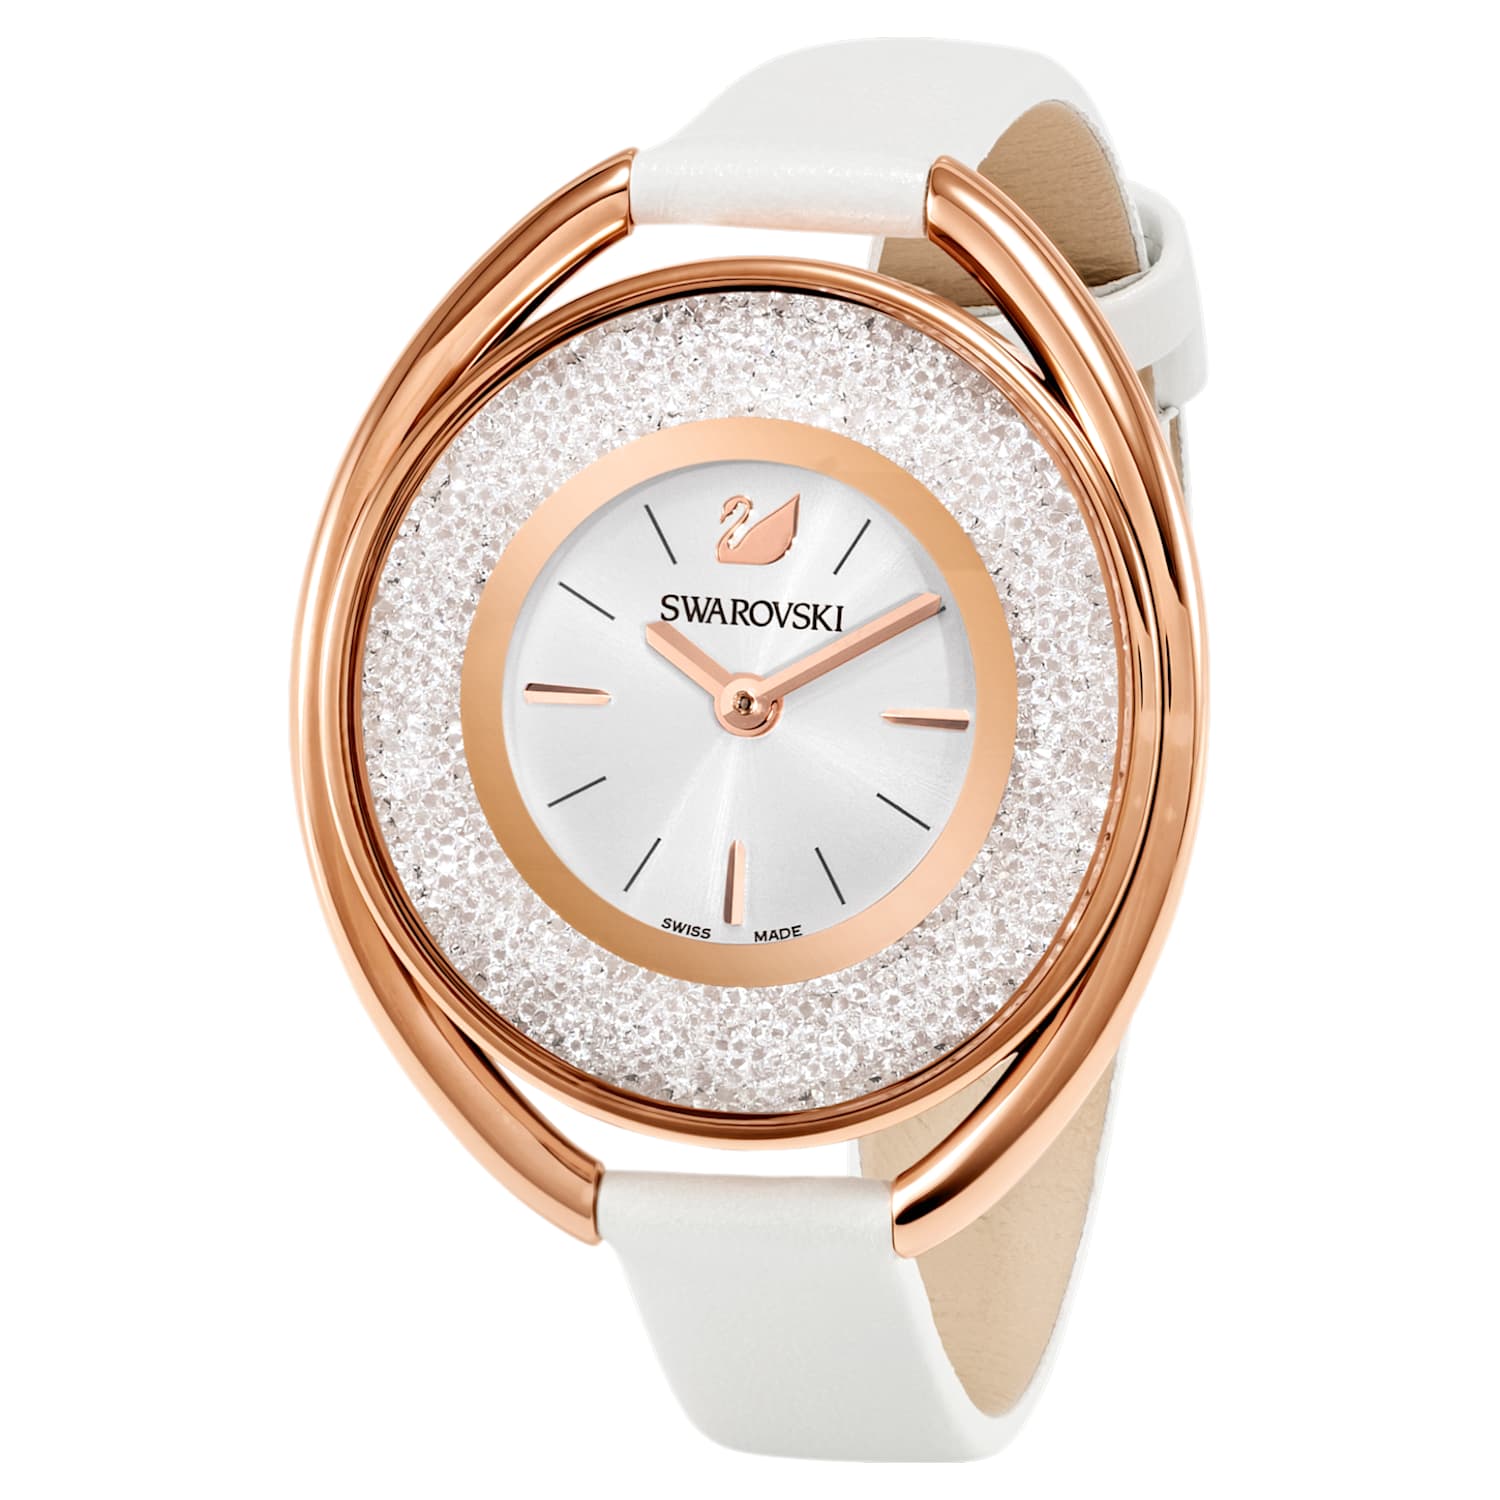 Crystalline Oval watch, Leather strap, White, Rose gold-tone finish